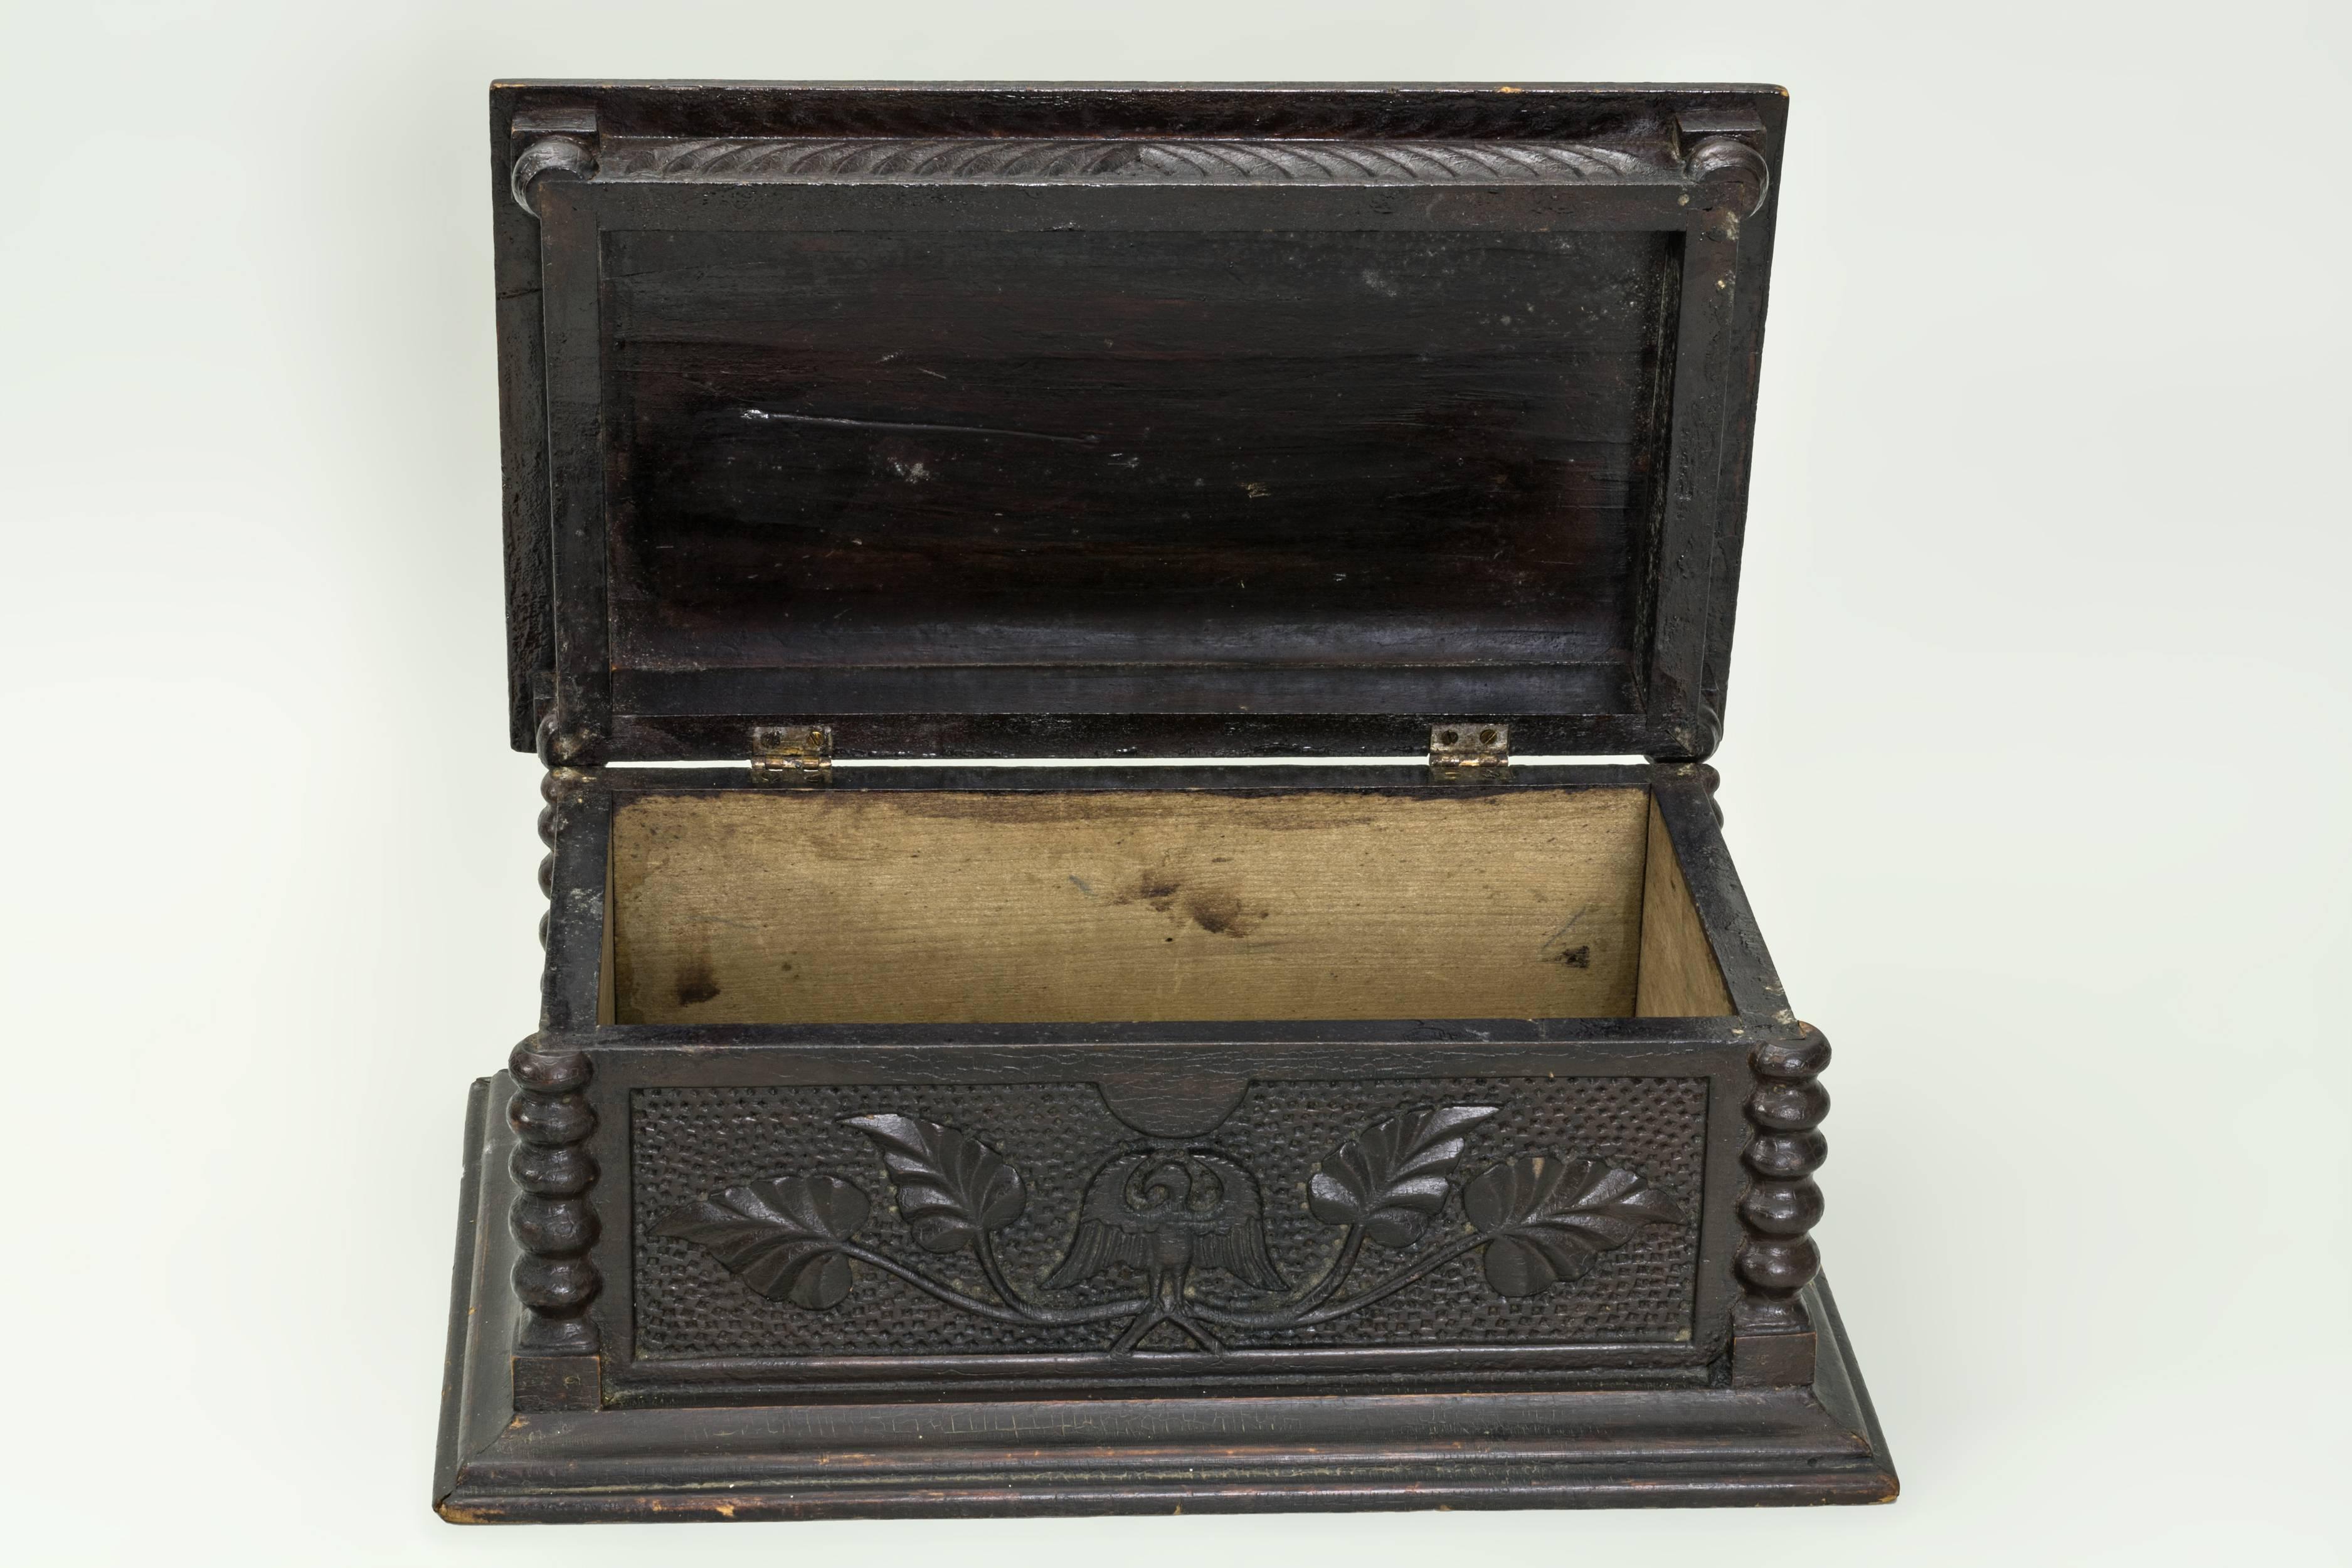 
Small lift top keepsake Pine box.
Relief and chip carved throughout, decorated with stars, eagles and gilded stars. Bottom reads: “Made by a Prisoner in Wethersfield, Ct”, dated 1910. 